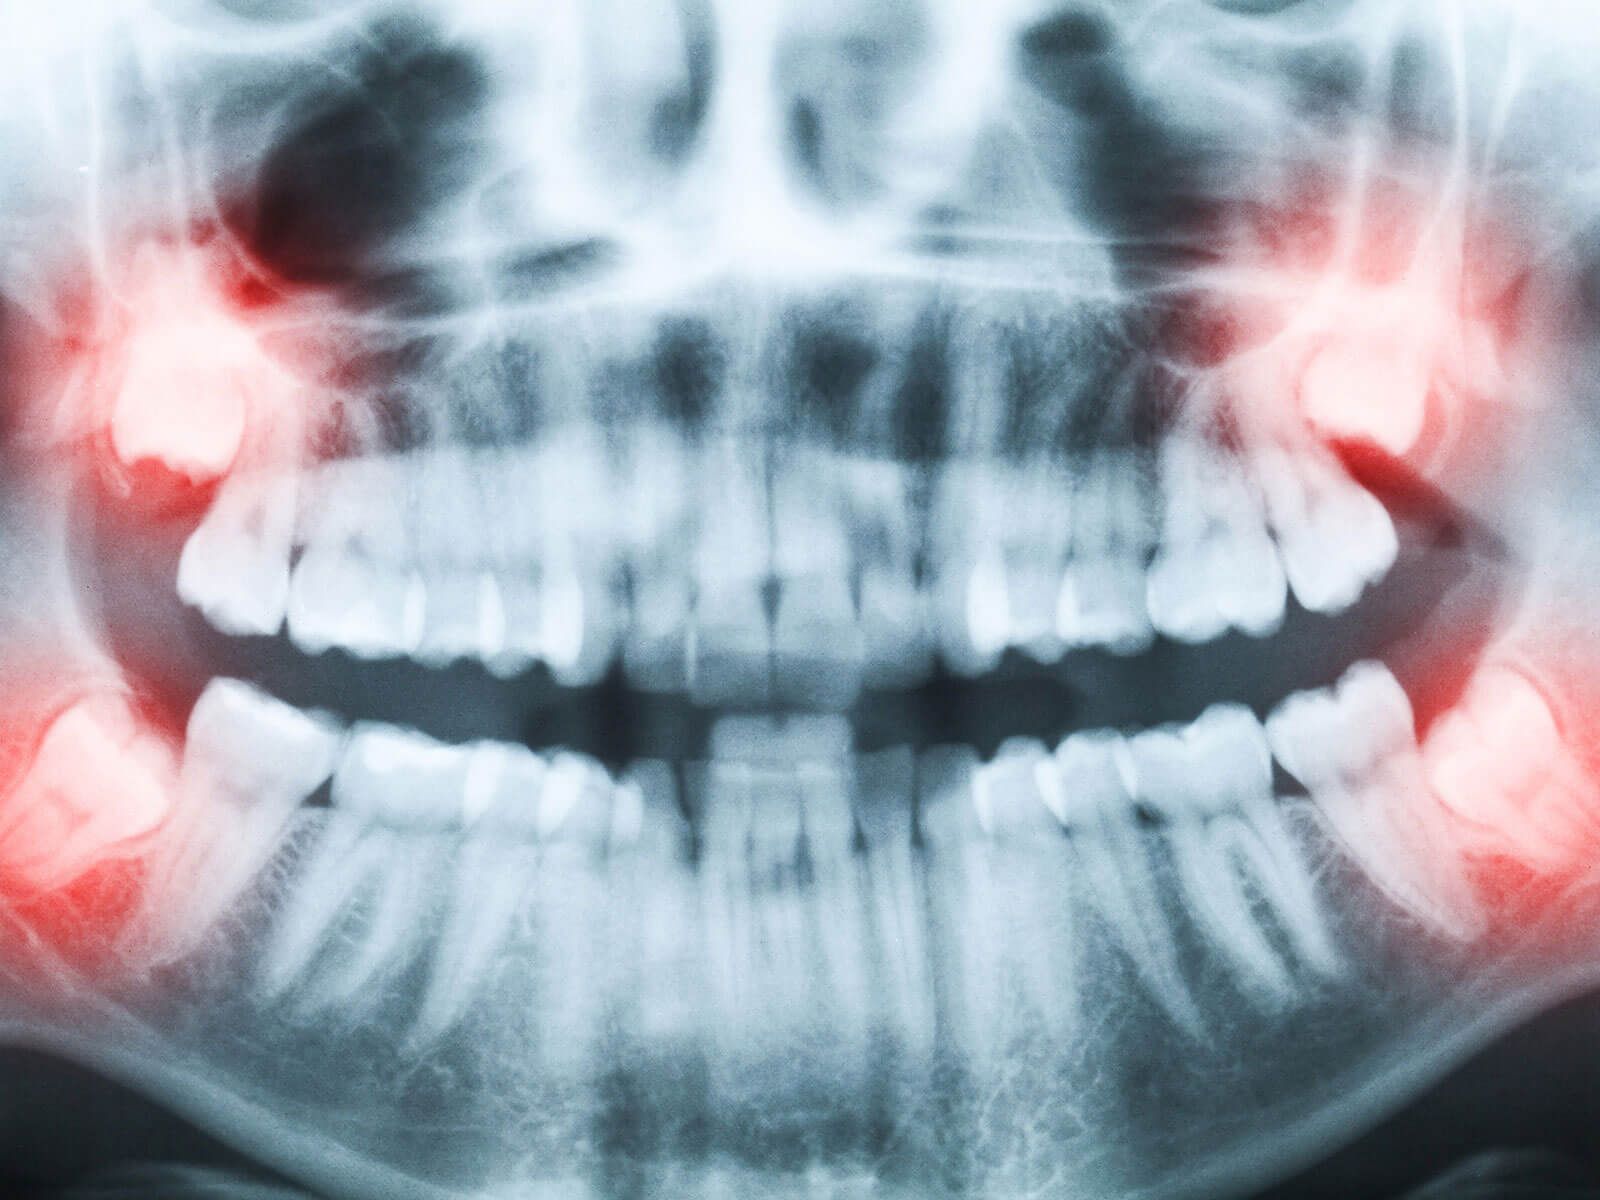 Is It Safe To Remove All Four Wisdom Teeth At Once?